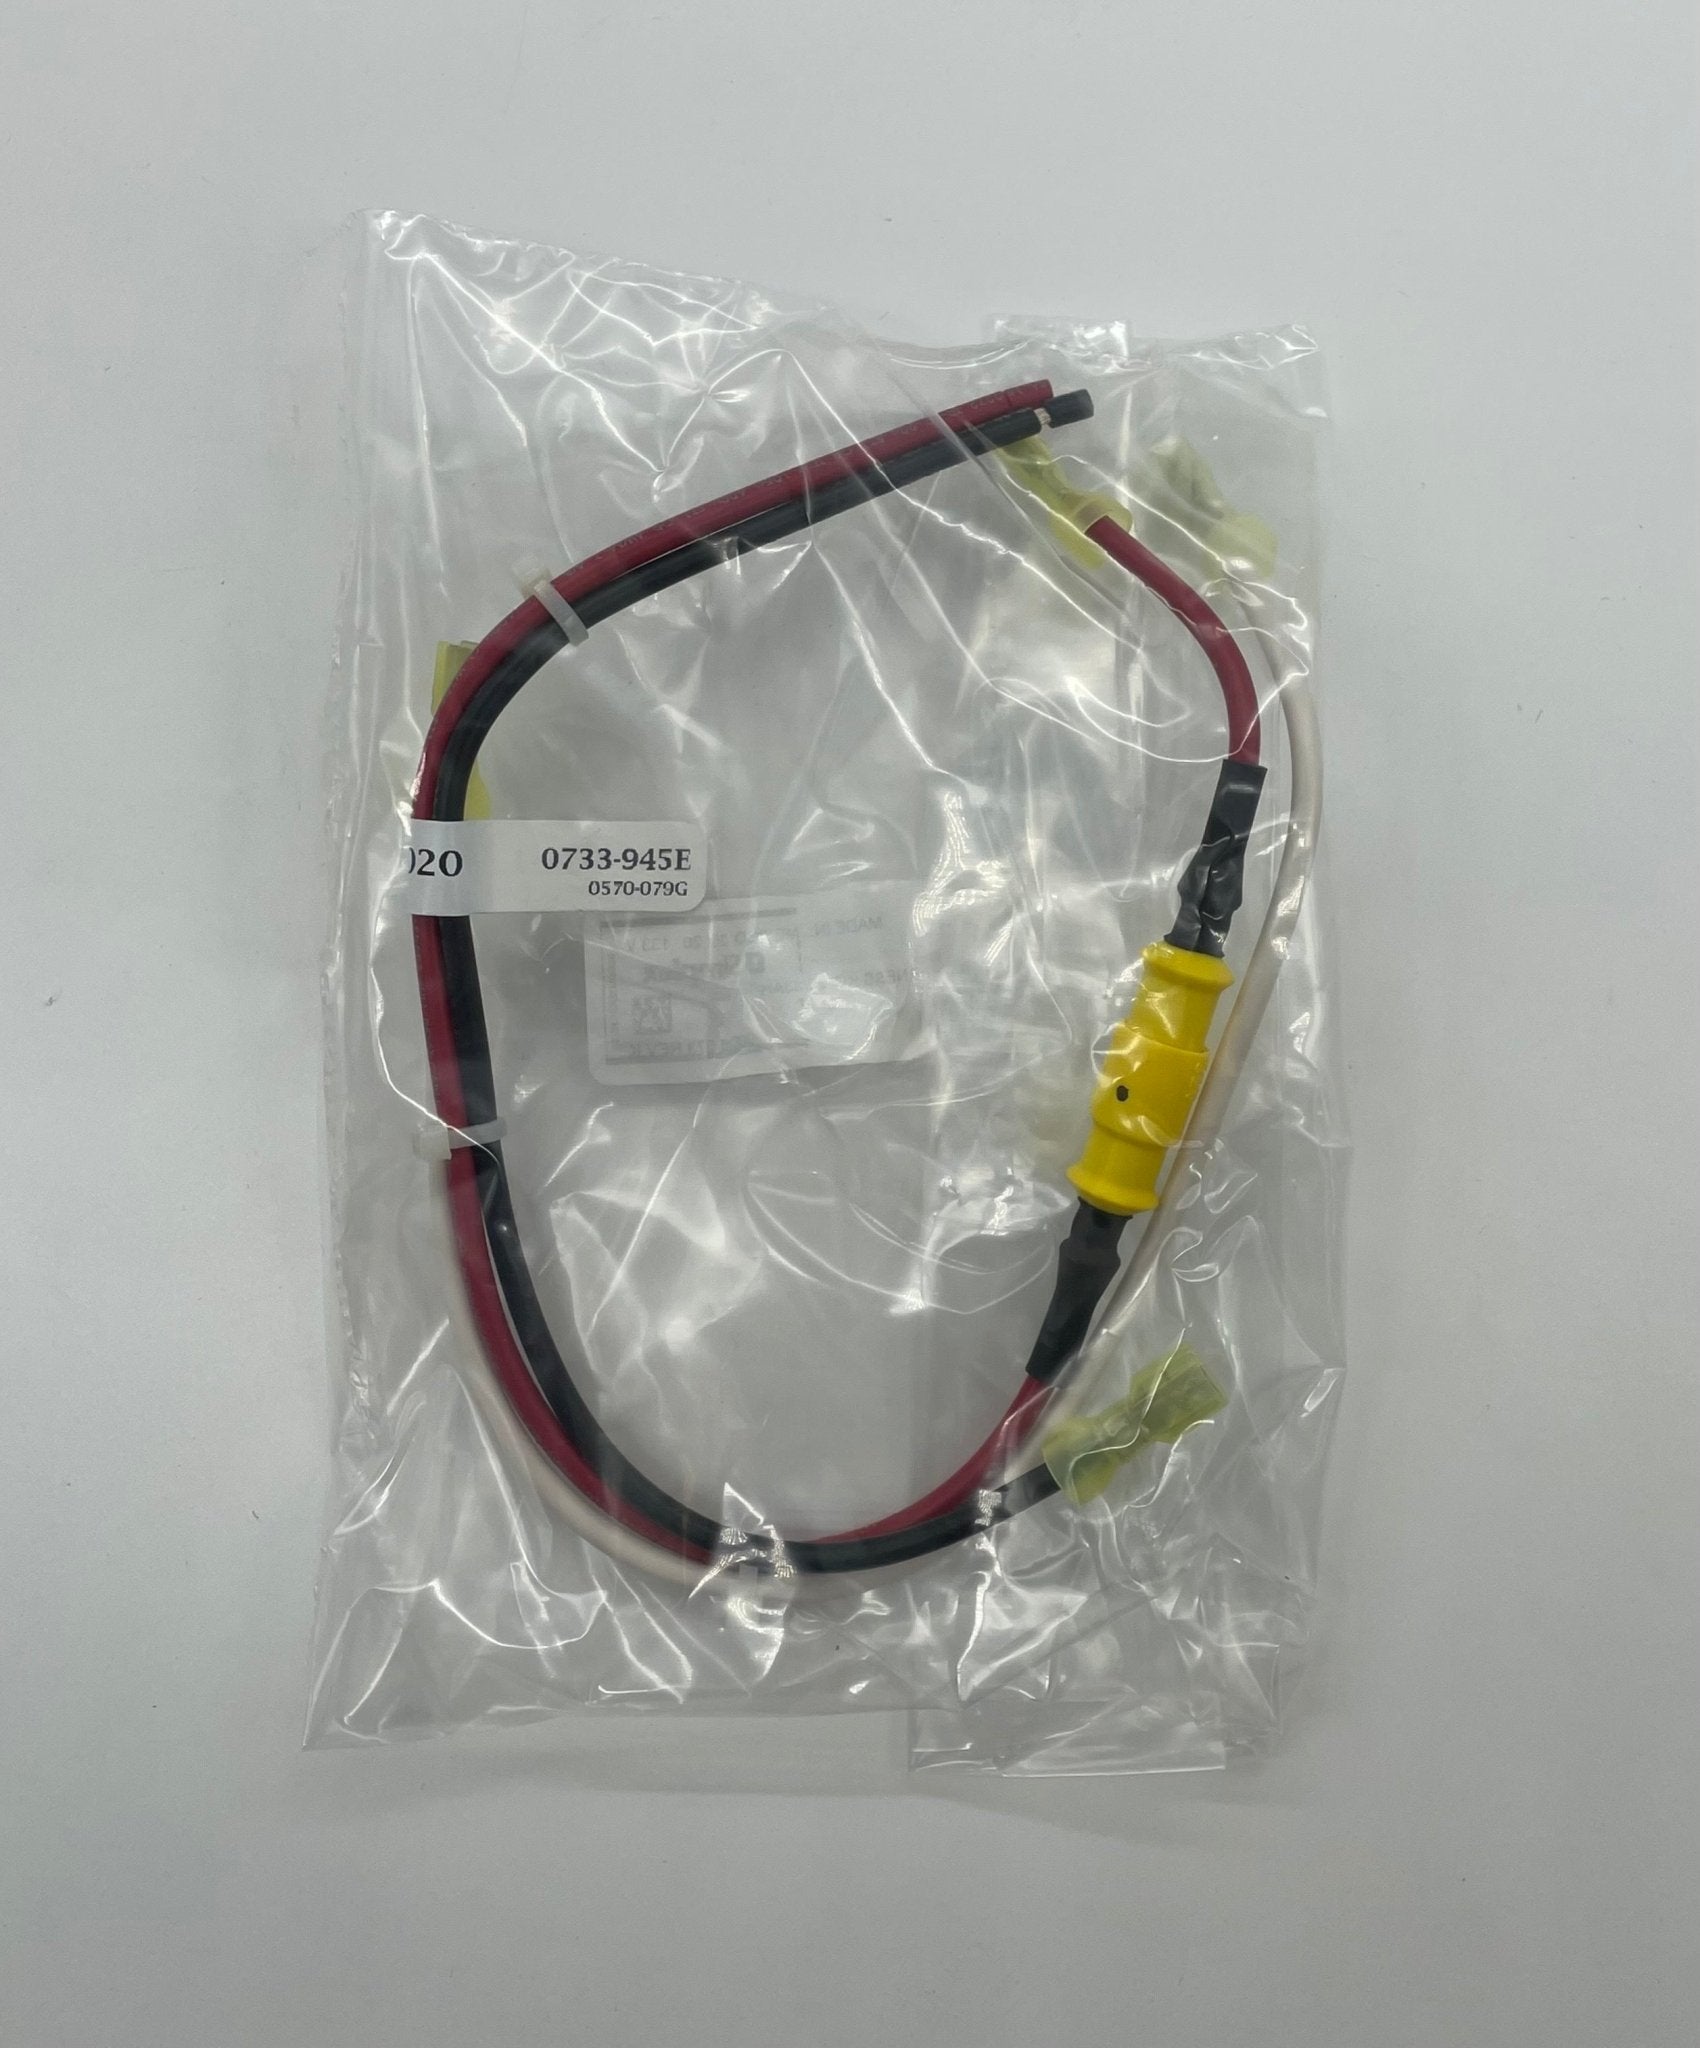 Simplex 733-945 Battery Harness Kit - The Fire Alarm Supplier